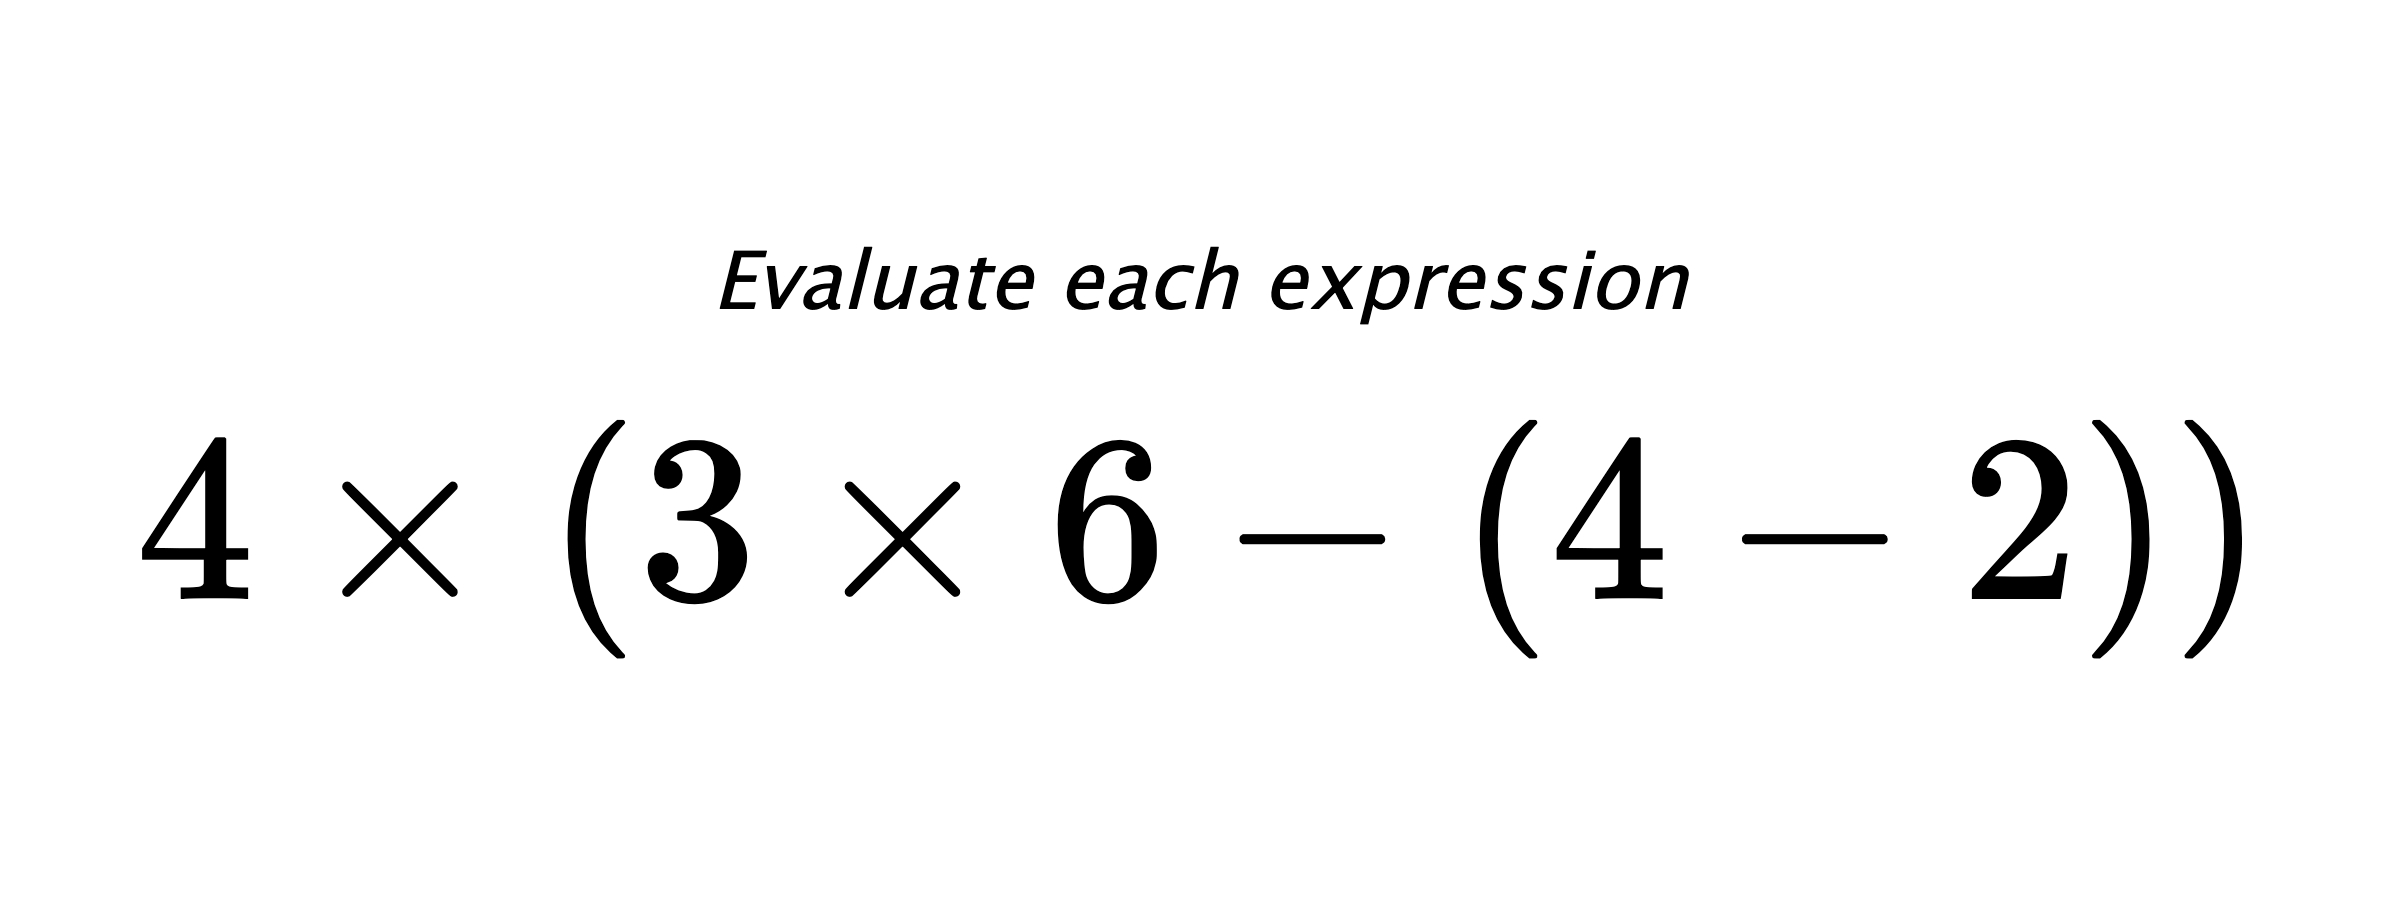 Evaluate each expression $ 4 \times (3 \times 6 - (4 - 2)) $